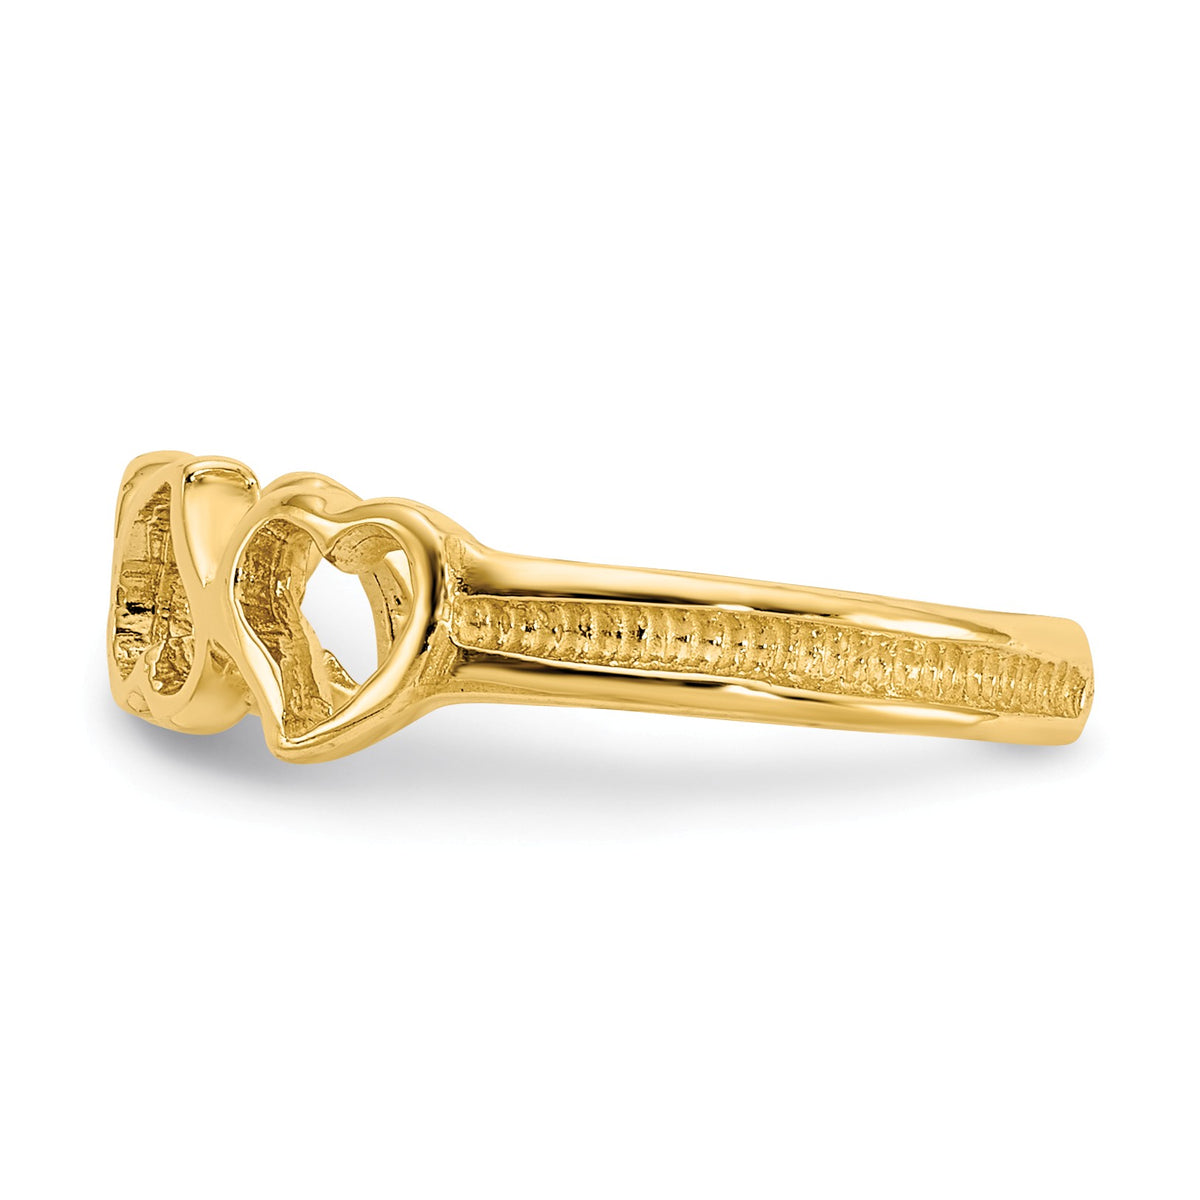 Alternate view of the Band of Hearts Toe Ring in 14 Karat Gold by The Black Bow Jewelry Co.